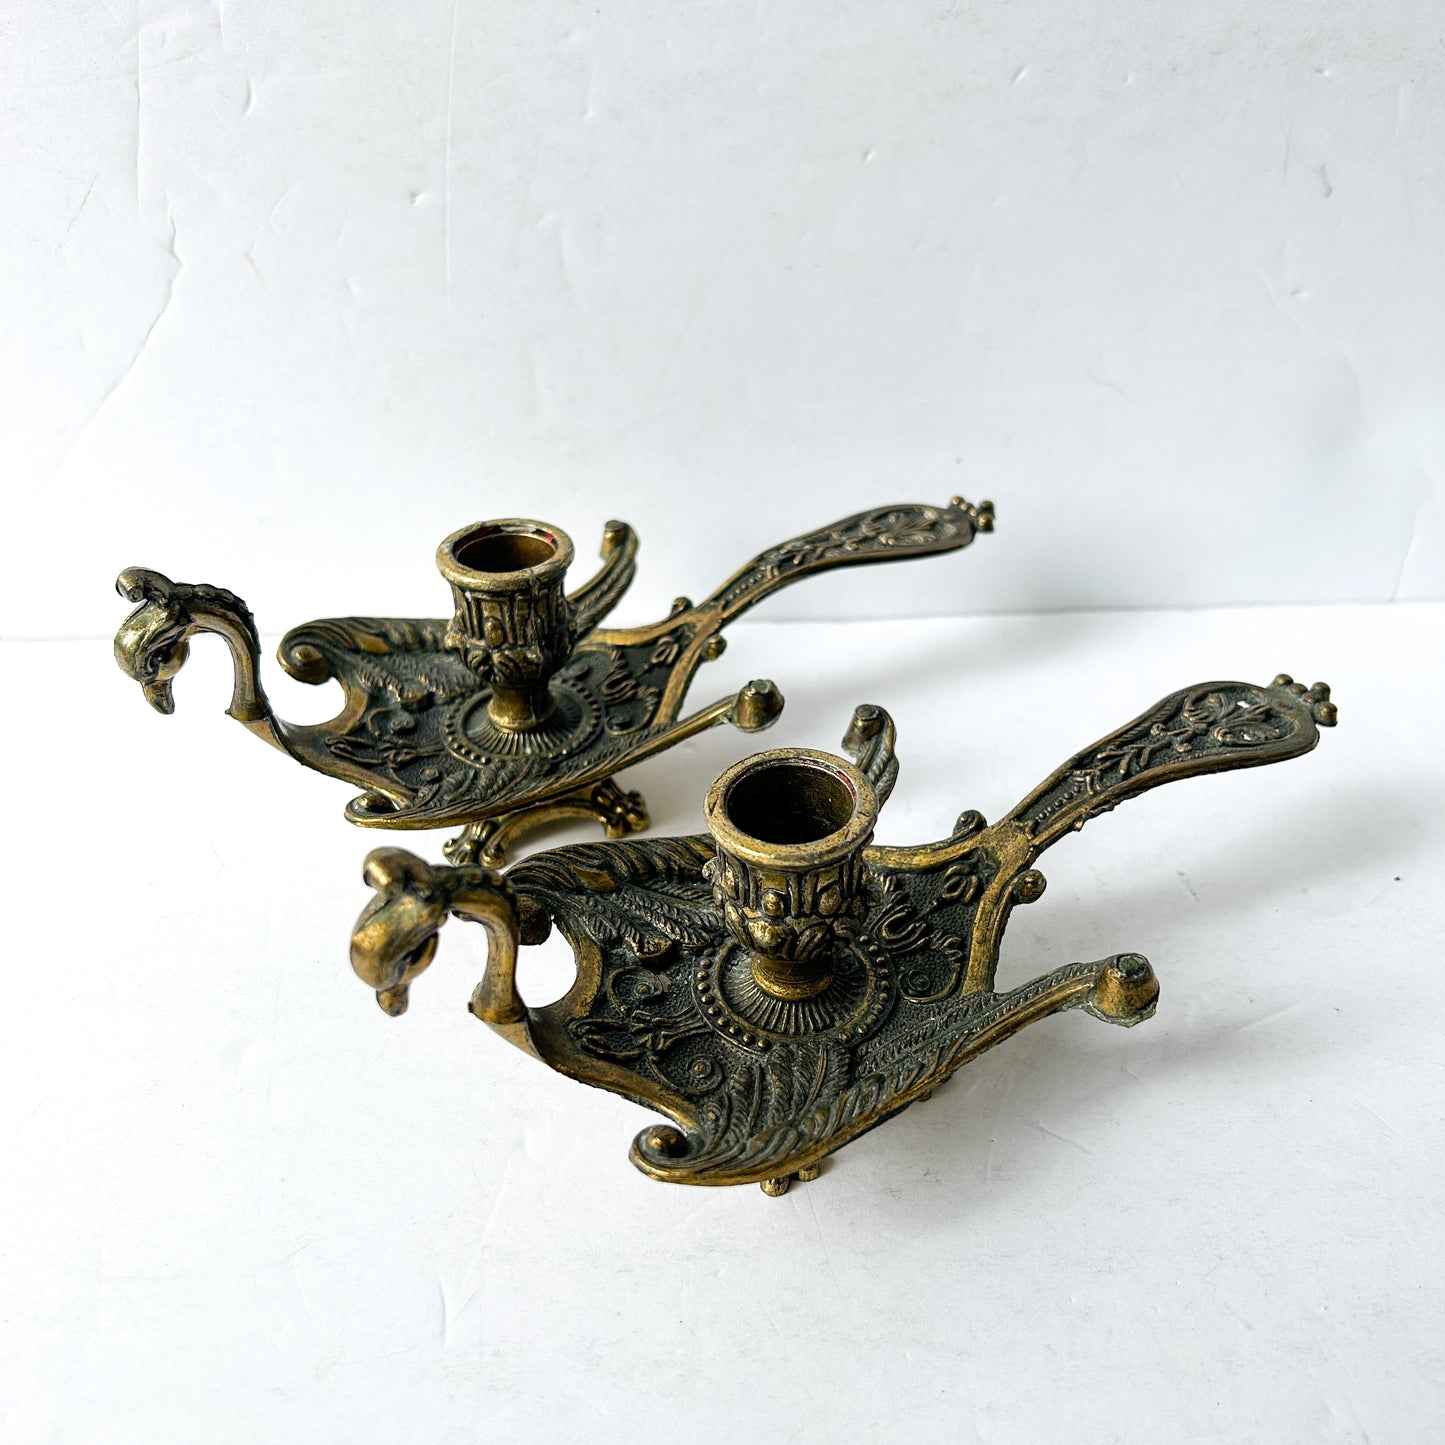 Vintage brass tone peacock candle holders, Set of 2, Rococo Style, Made in Italy